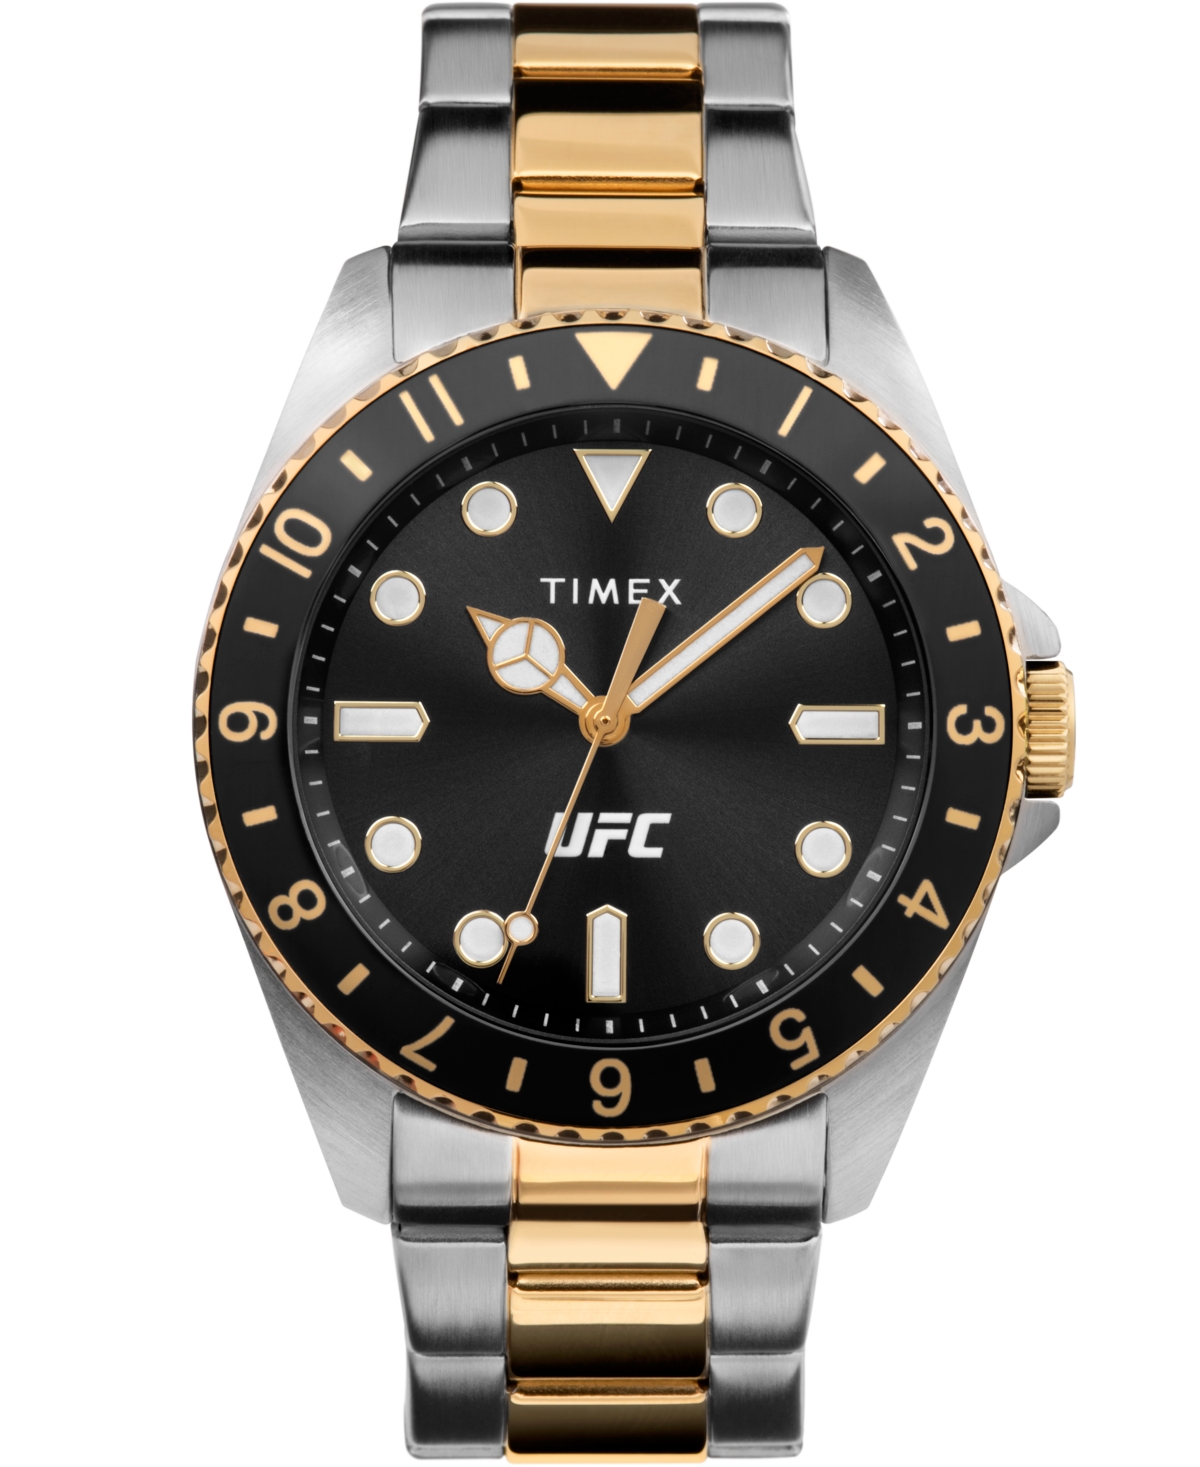 Timex Ufc Men's Quartz Debut Stainless Steel Two-tone Watch, 42mm